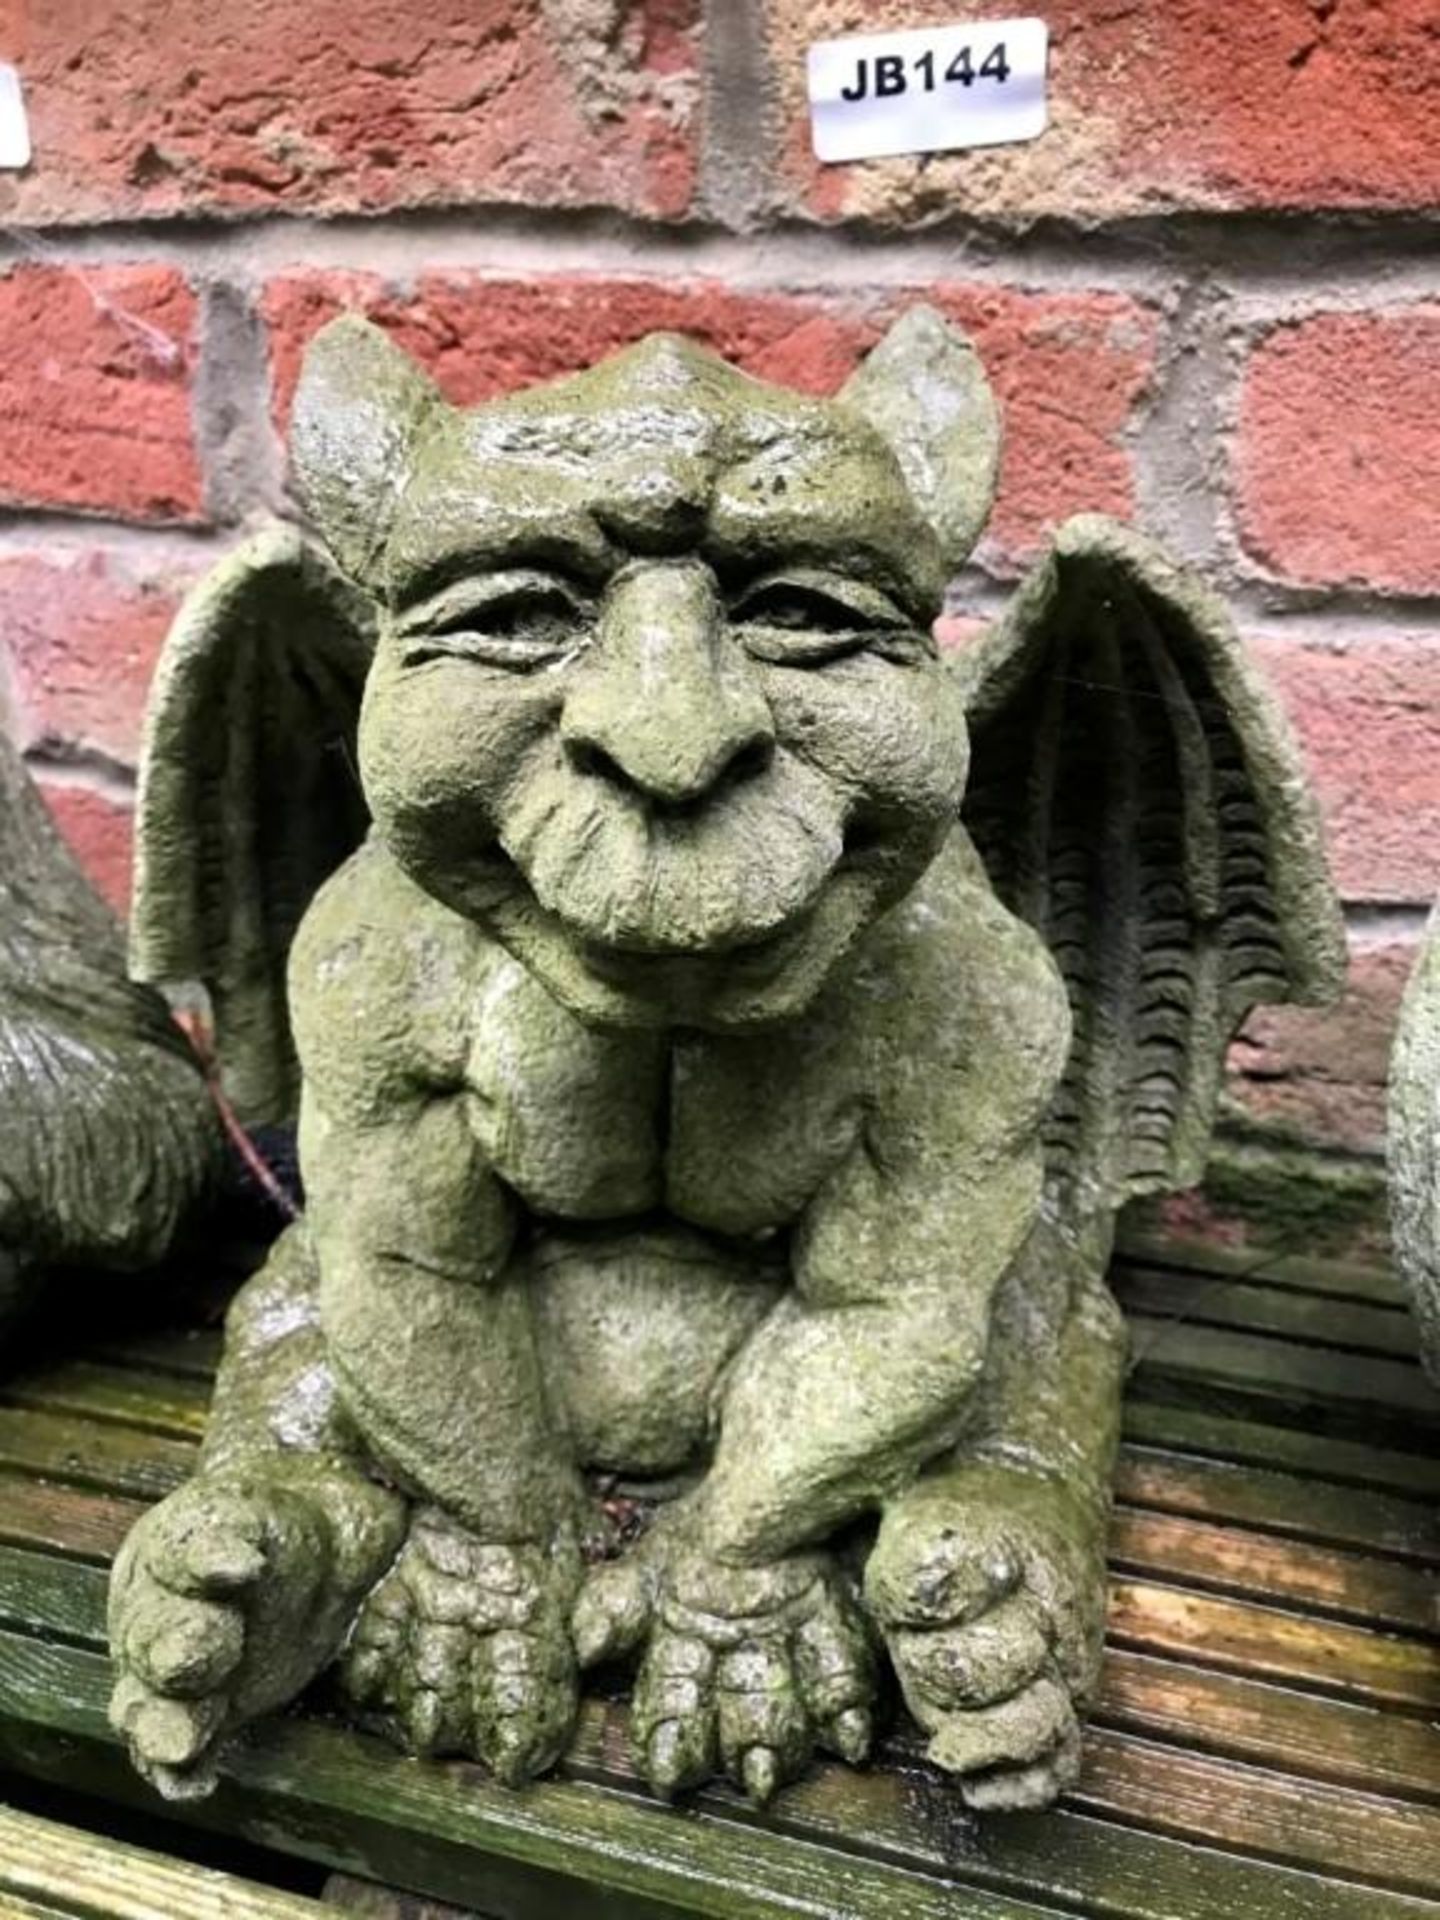 1 x Stone Gargoyle Character - Size Approx 20cm x 20cm - Ref: JB144 - Pre-Owned - NO VAT ON THE HAMM